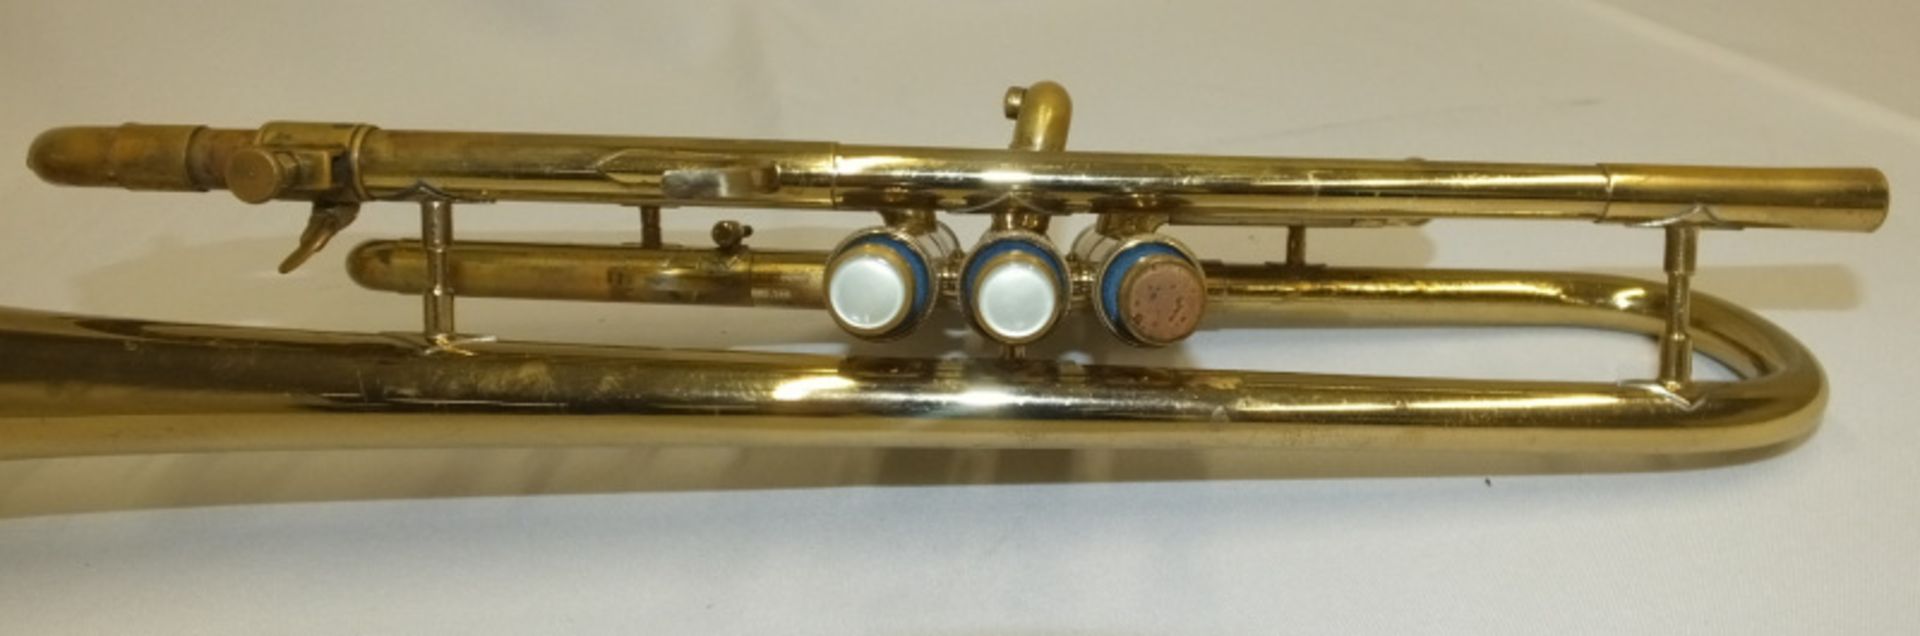 Corton 80 Trumpet in case - serial number 056226 - Please check photos carefully - Image 7 of 14